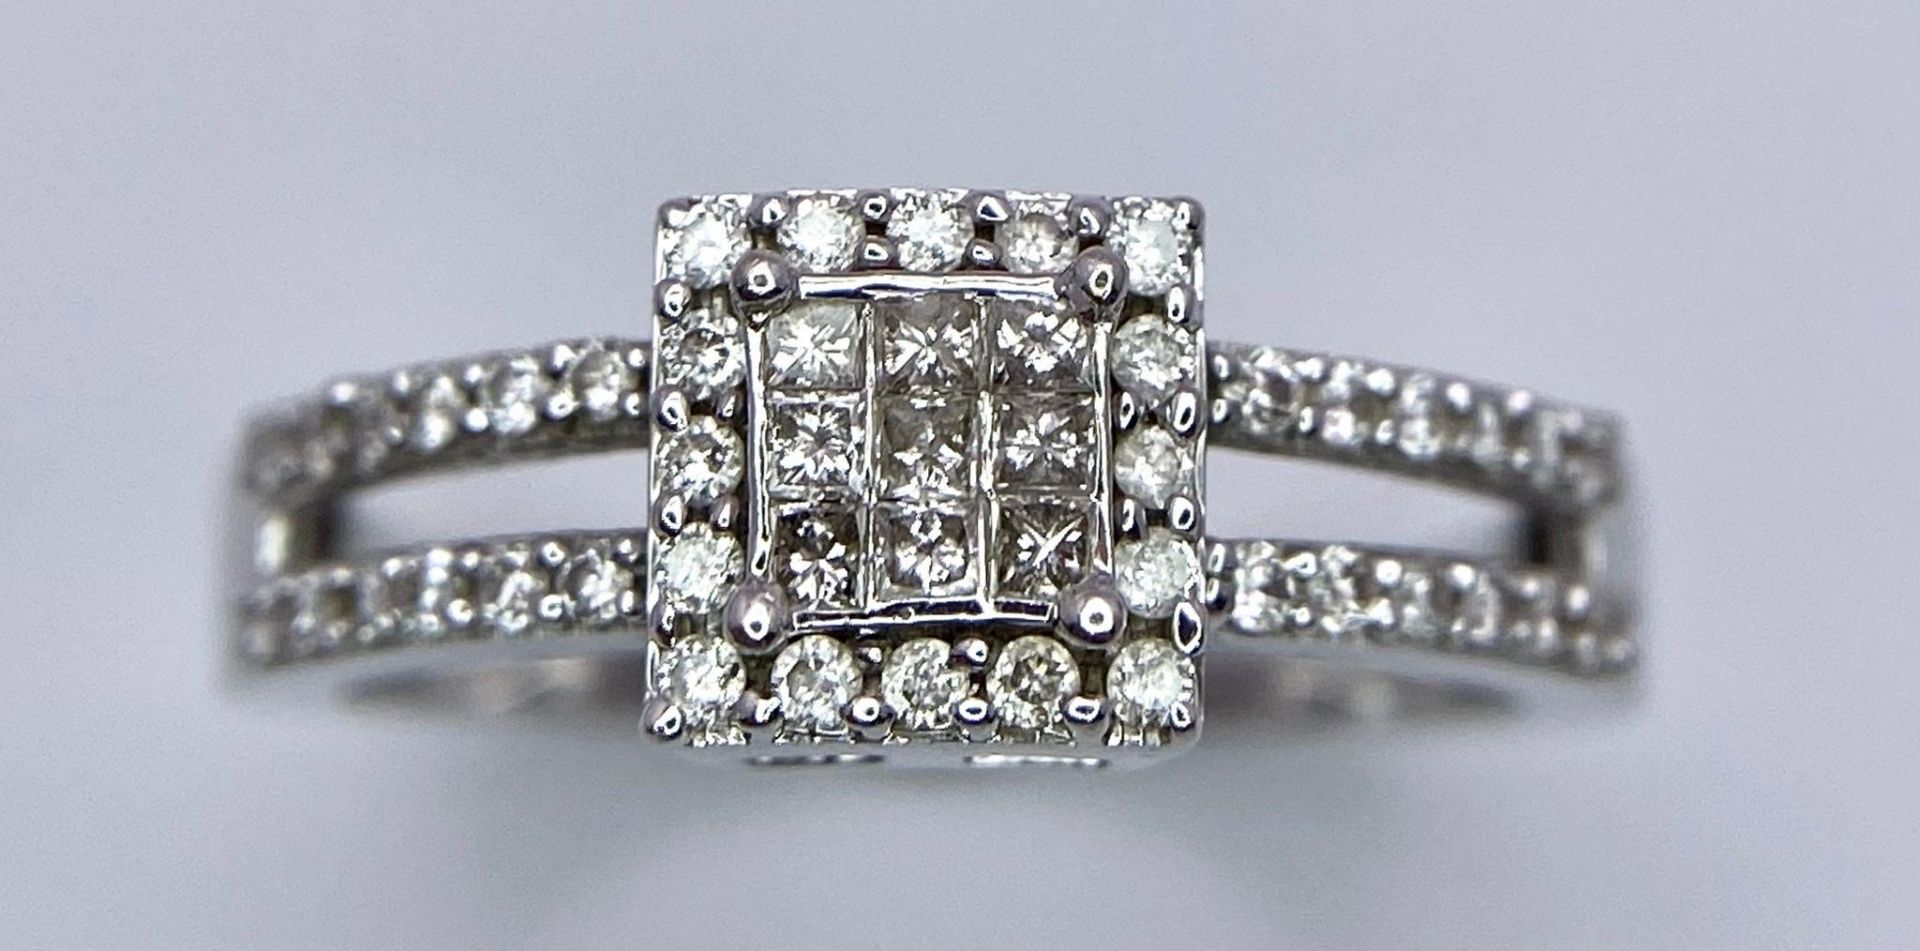 18K WHITE GOLD DIAMOND RING, 0.33CT. WEIGHT: 3.9G SIZE L SC 5028 - Image 2 of 4